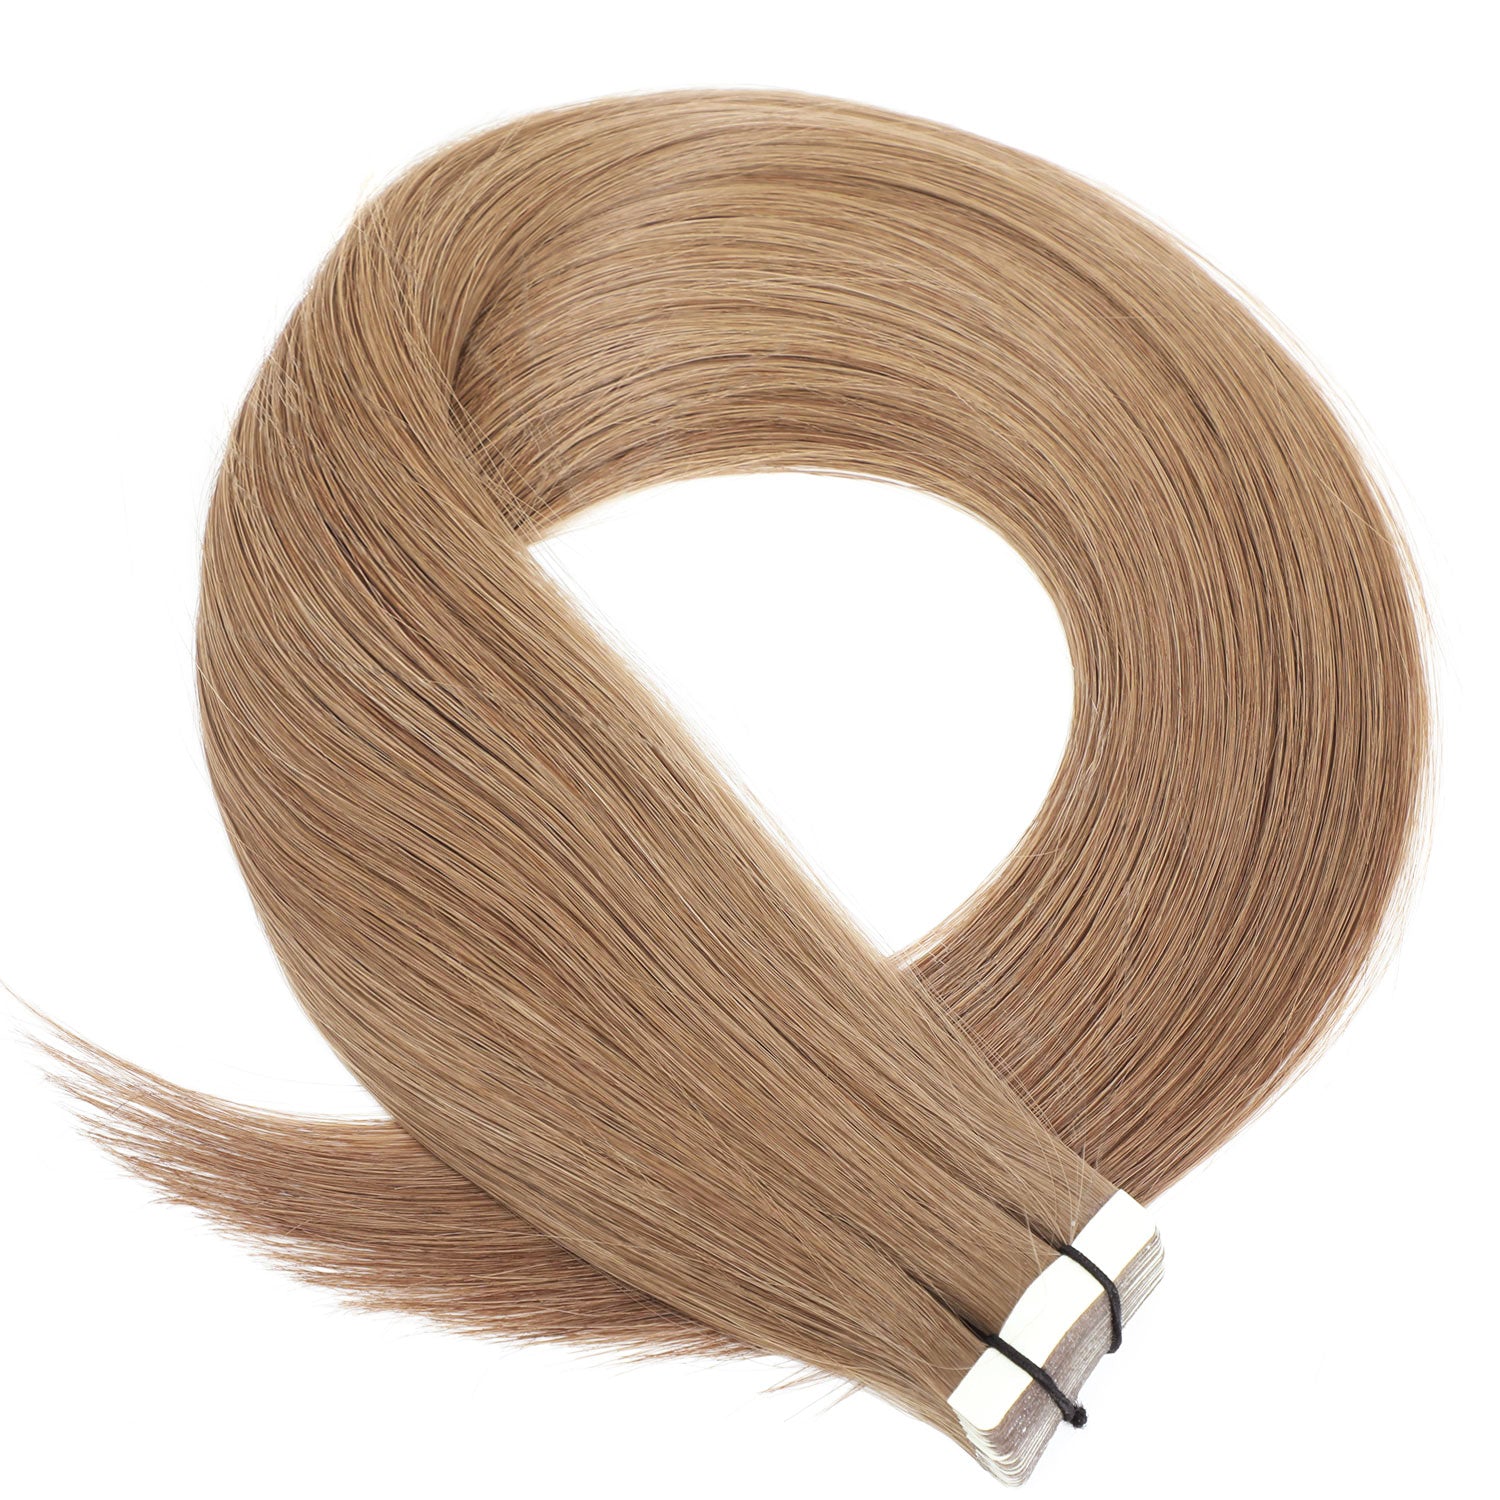 Hair Tape Extensions, Our Human Hair Extensions are designed to provide a natural and seamless blend. These tape extensions add length and volume to your hair, enhancing your natural beauty.